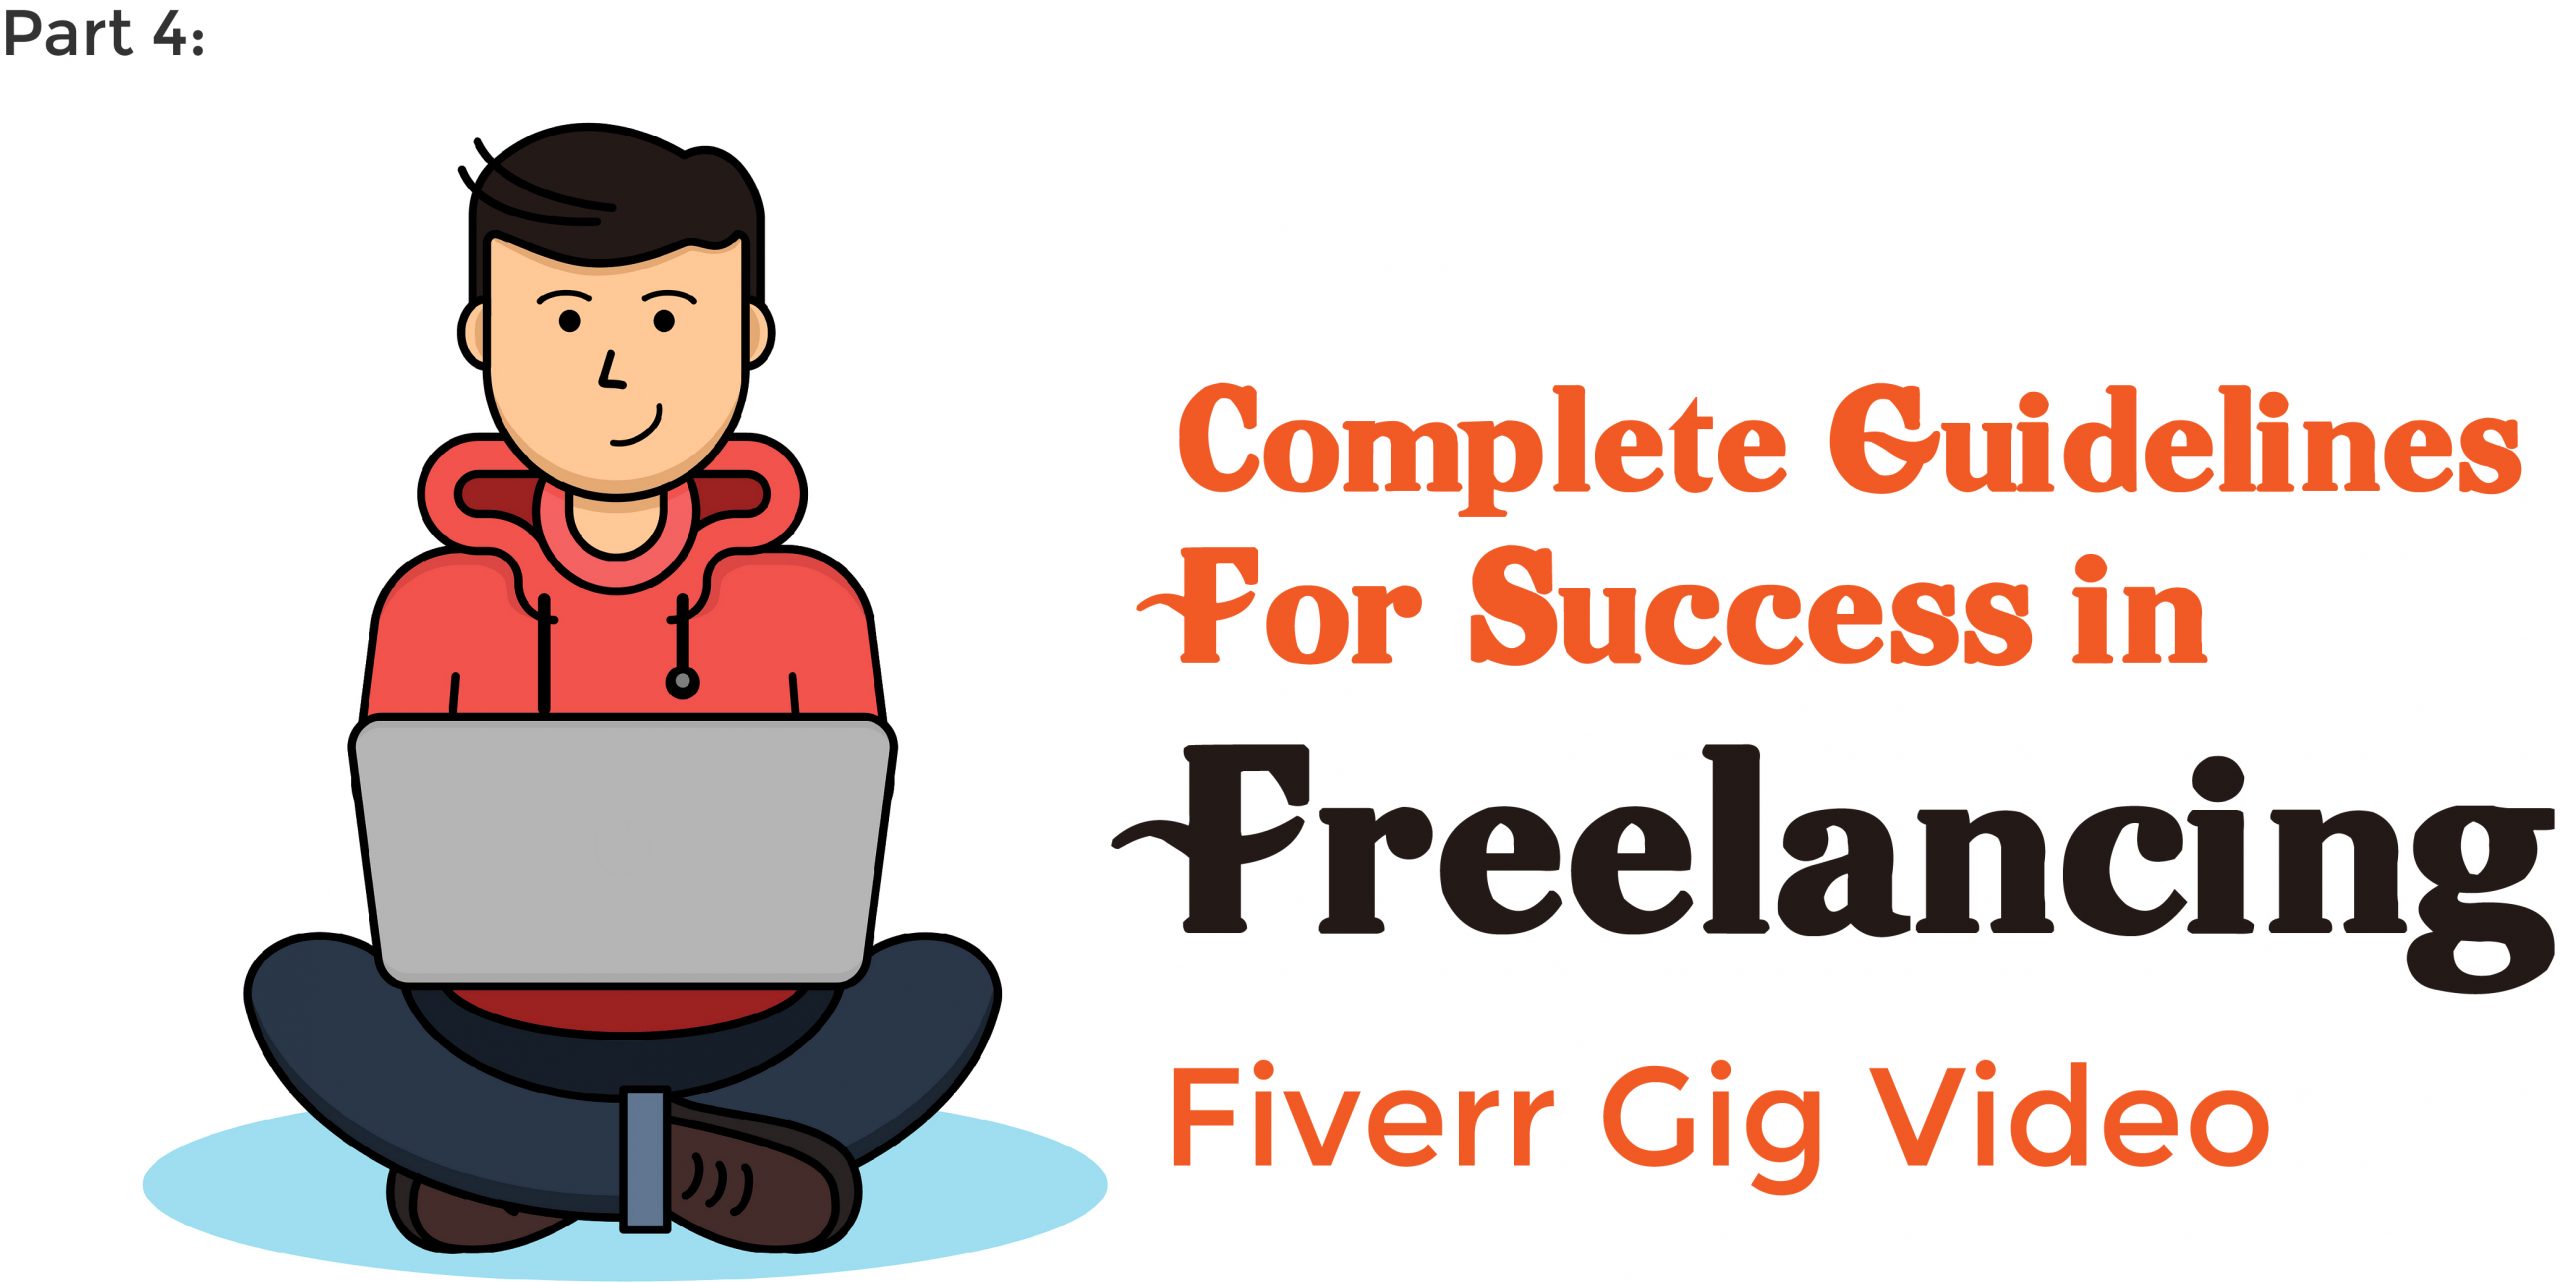 How to Create Fiverr Gig Video | Part 4